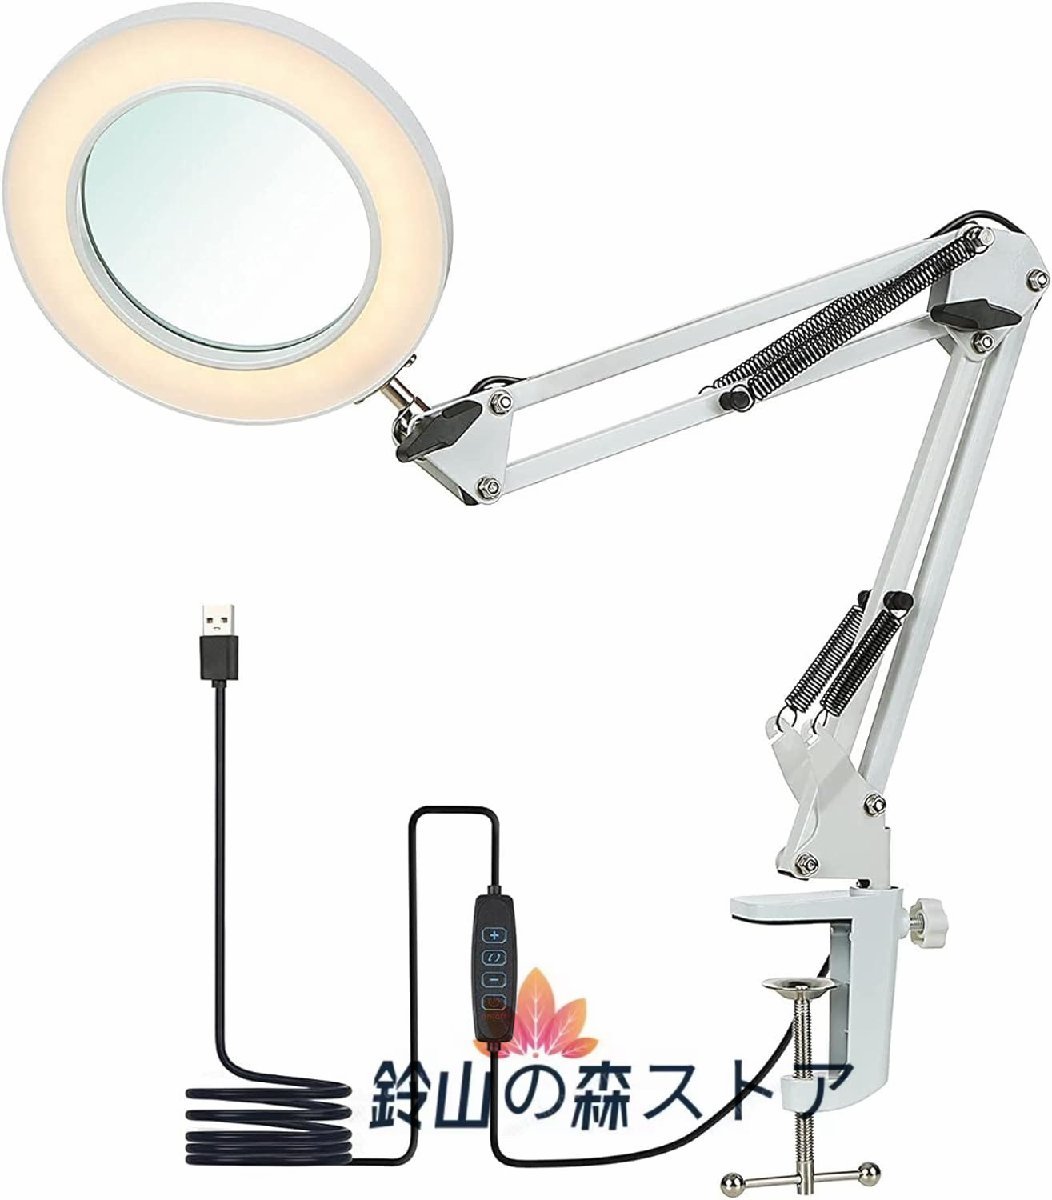  new arrival * magnifying glass tes clamp 10 times lens 64 LED light clamp attaching repair industrial arts reading Crows Work 3.. style light mode USB power supply handle zfli